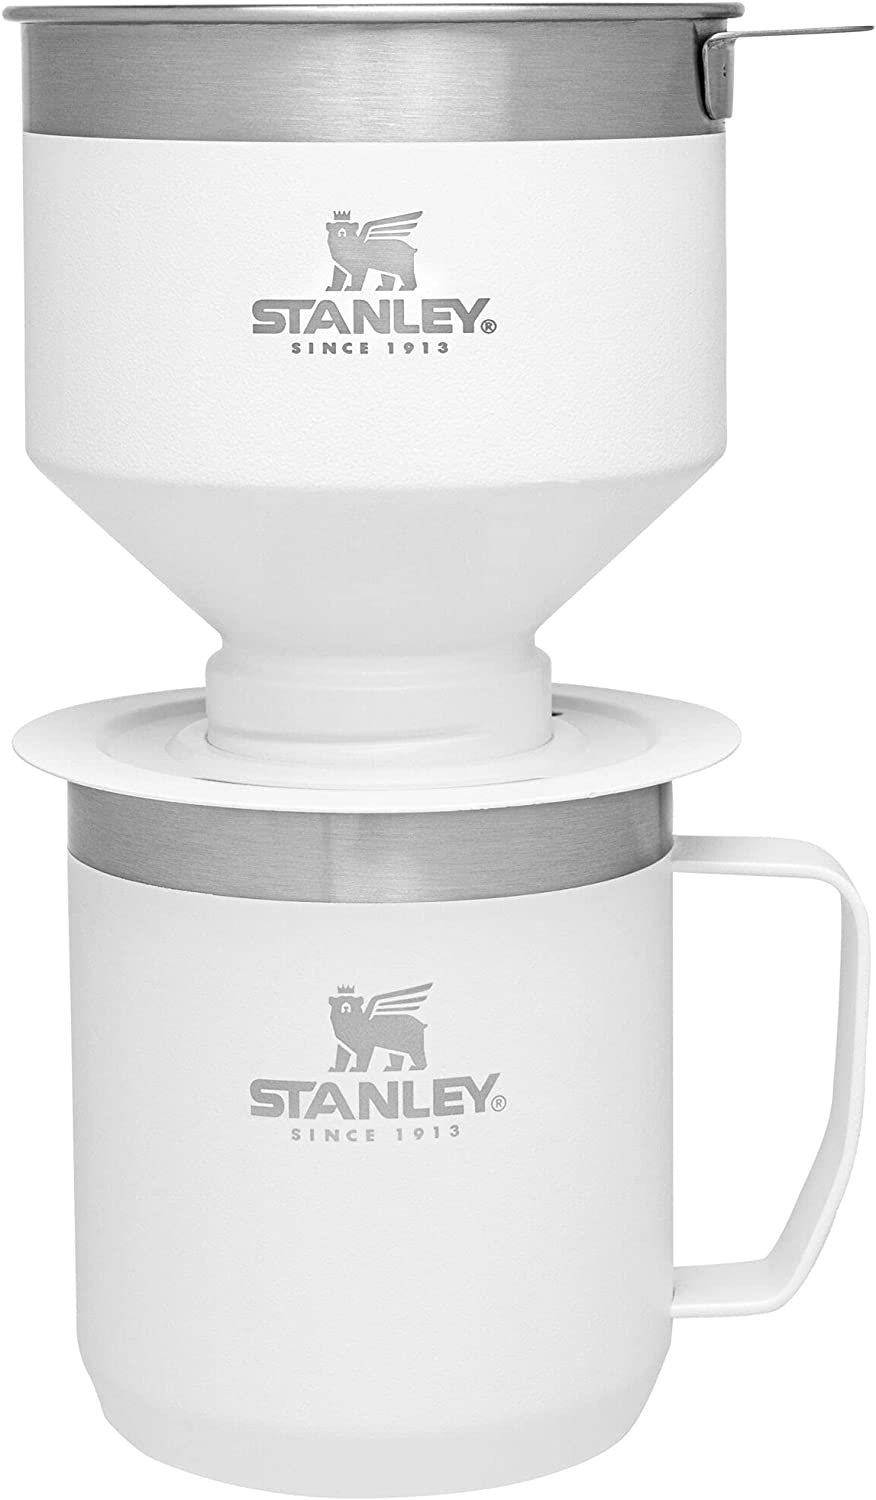 Stanley Camp Pour Over Coffee Brewer Set, Includes Legendary Camp Mug and Stainless Steel Coffee Dripper Cone, Paperless and